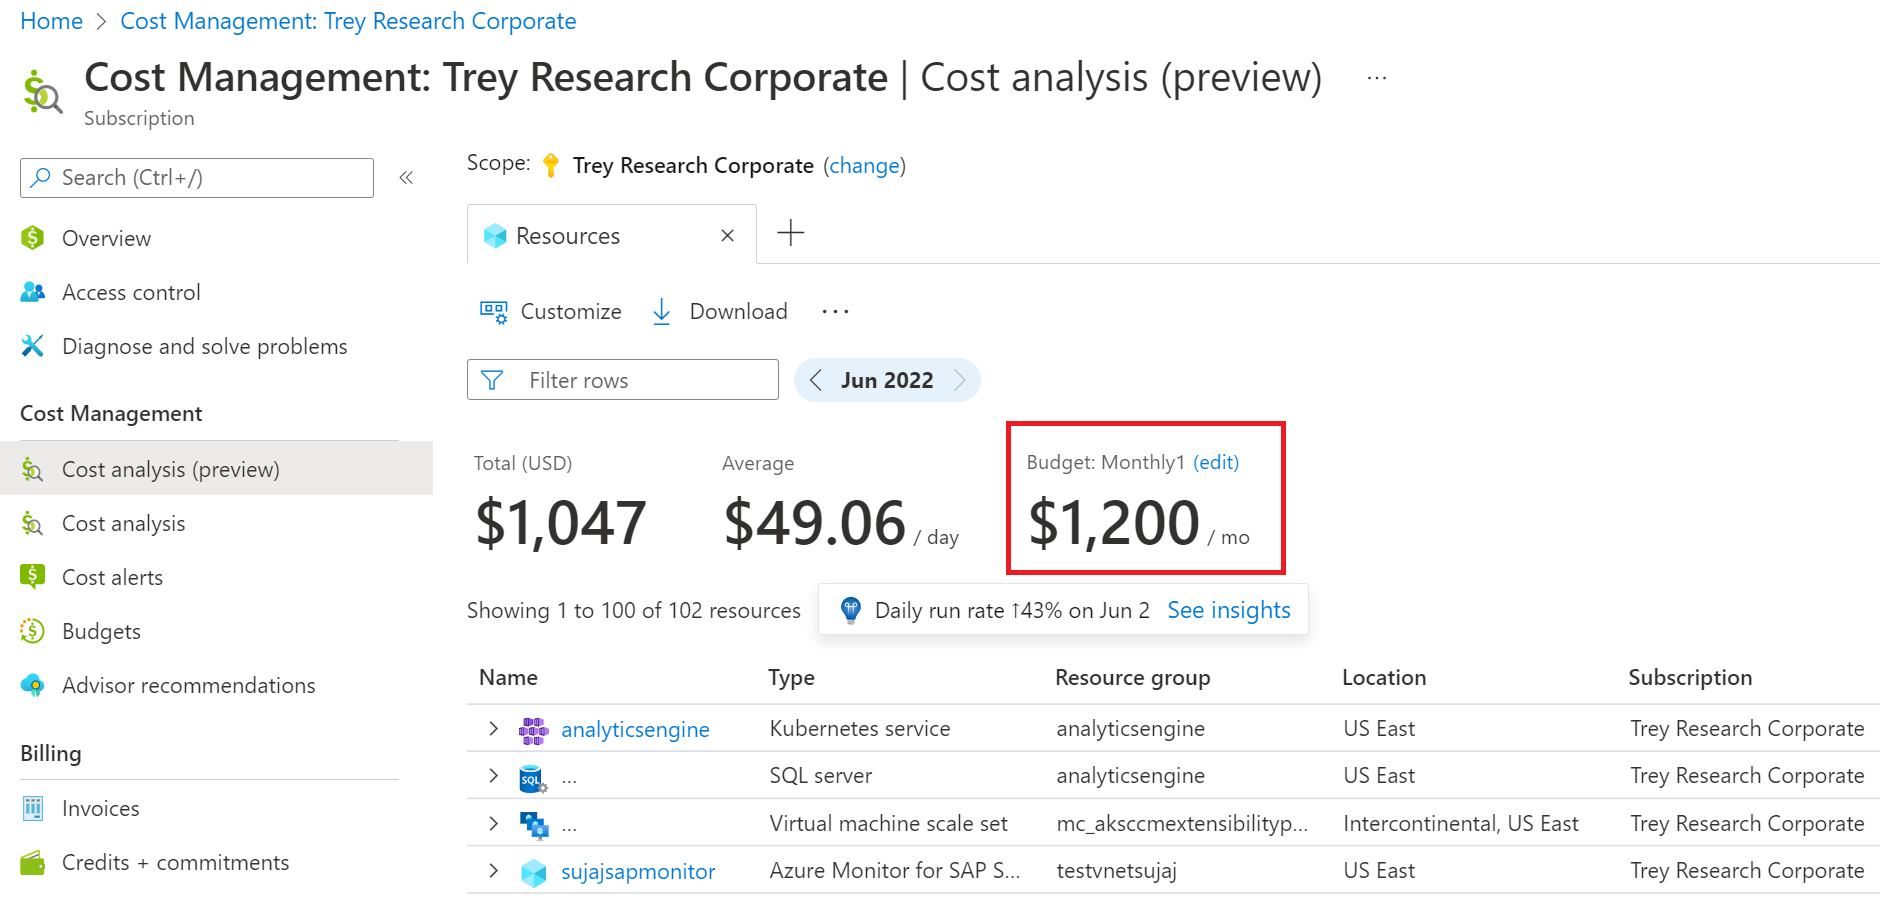 Screenshot showing Budget in the cost analysis preview.